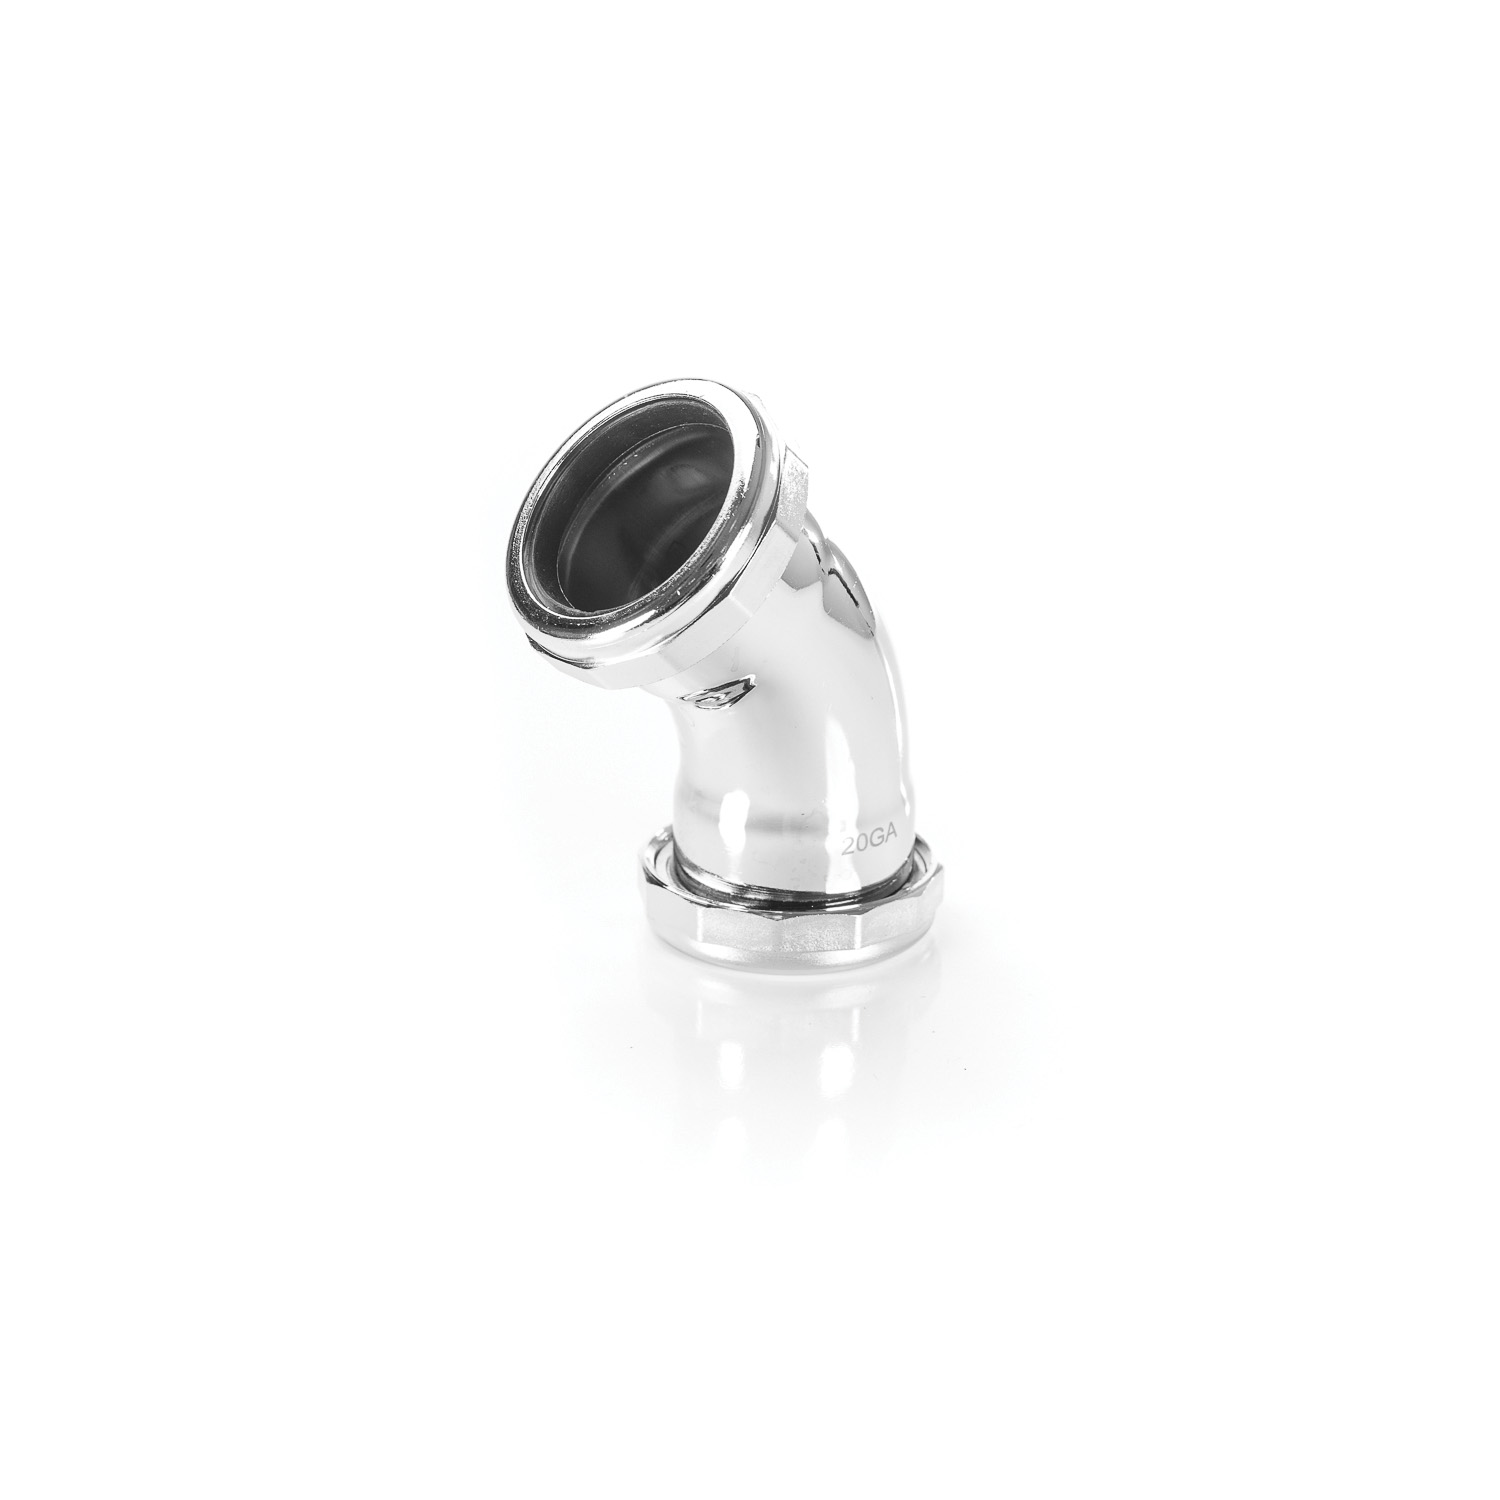 PASCO 34528 Repair Elbow With Chrome Plated Die Cast Nuts, 1-1/2 in Nominal, 45 deg, 20 ga, Polished Chrome